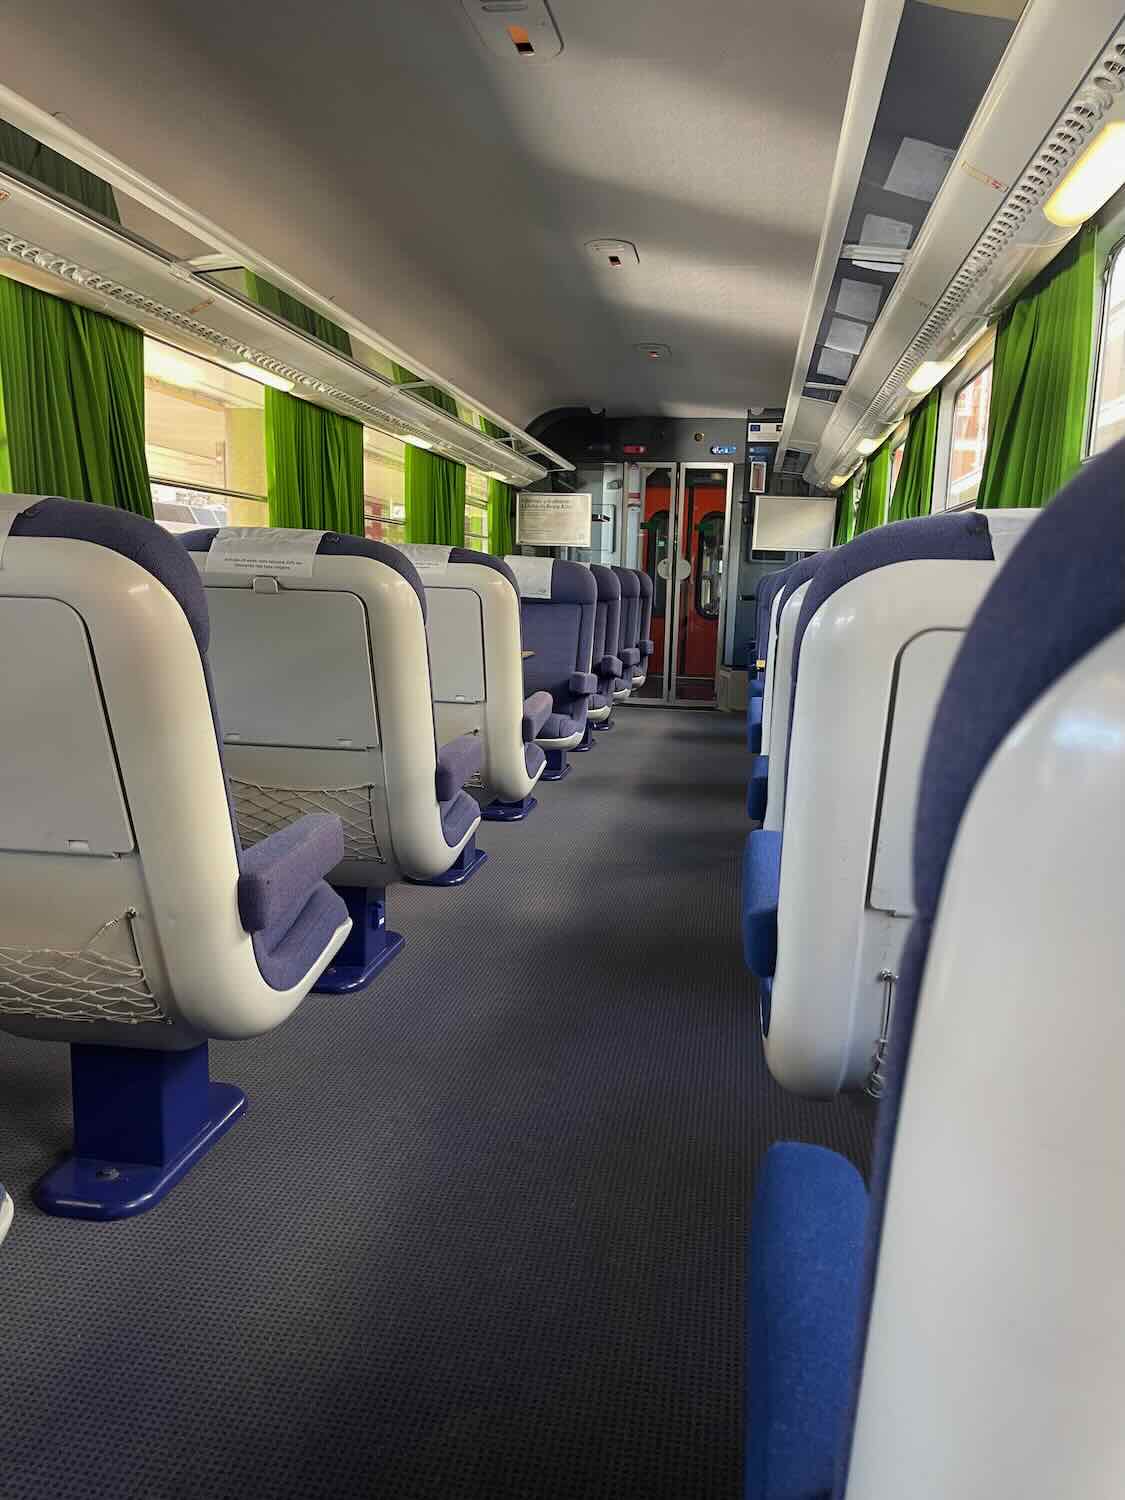 Inside view of a comfortable train carriage with blue and white seats ready to welcome passengers on the journey from Lisbon to Faro for a delightful day trip.